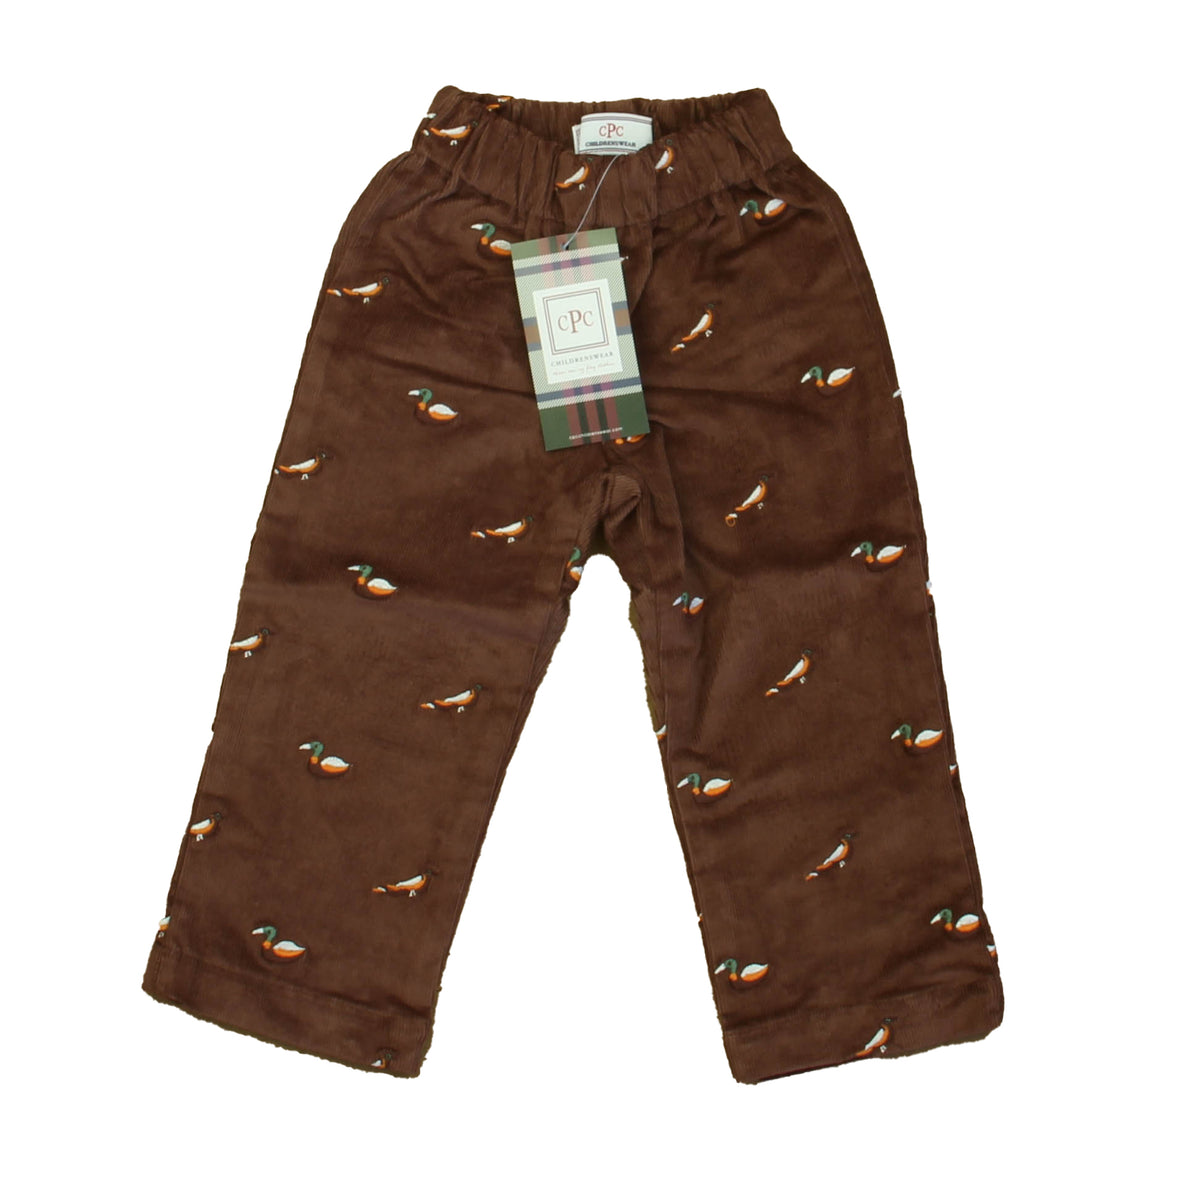 New with Tags: Fudgesicle w/ Bird Embroidery Pants size: 12-24 Months -- FINAL SALE